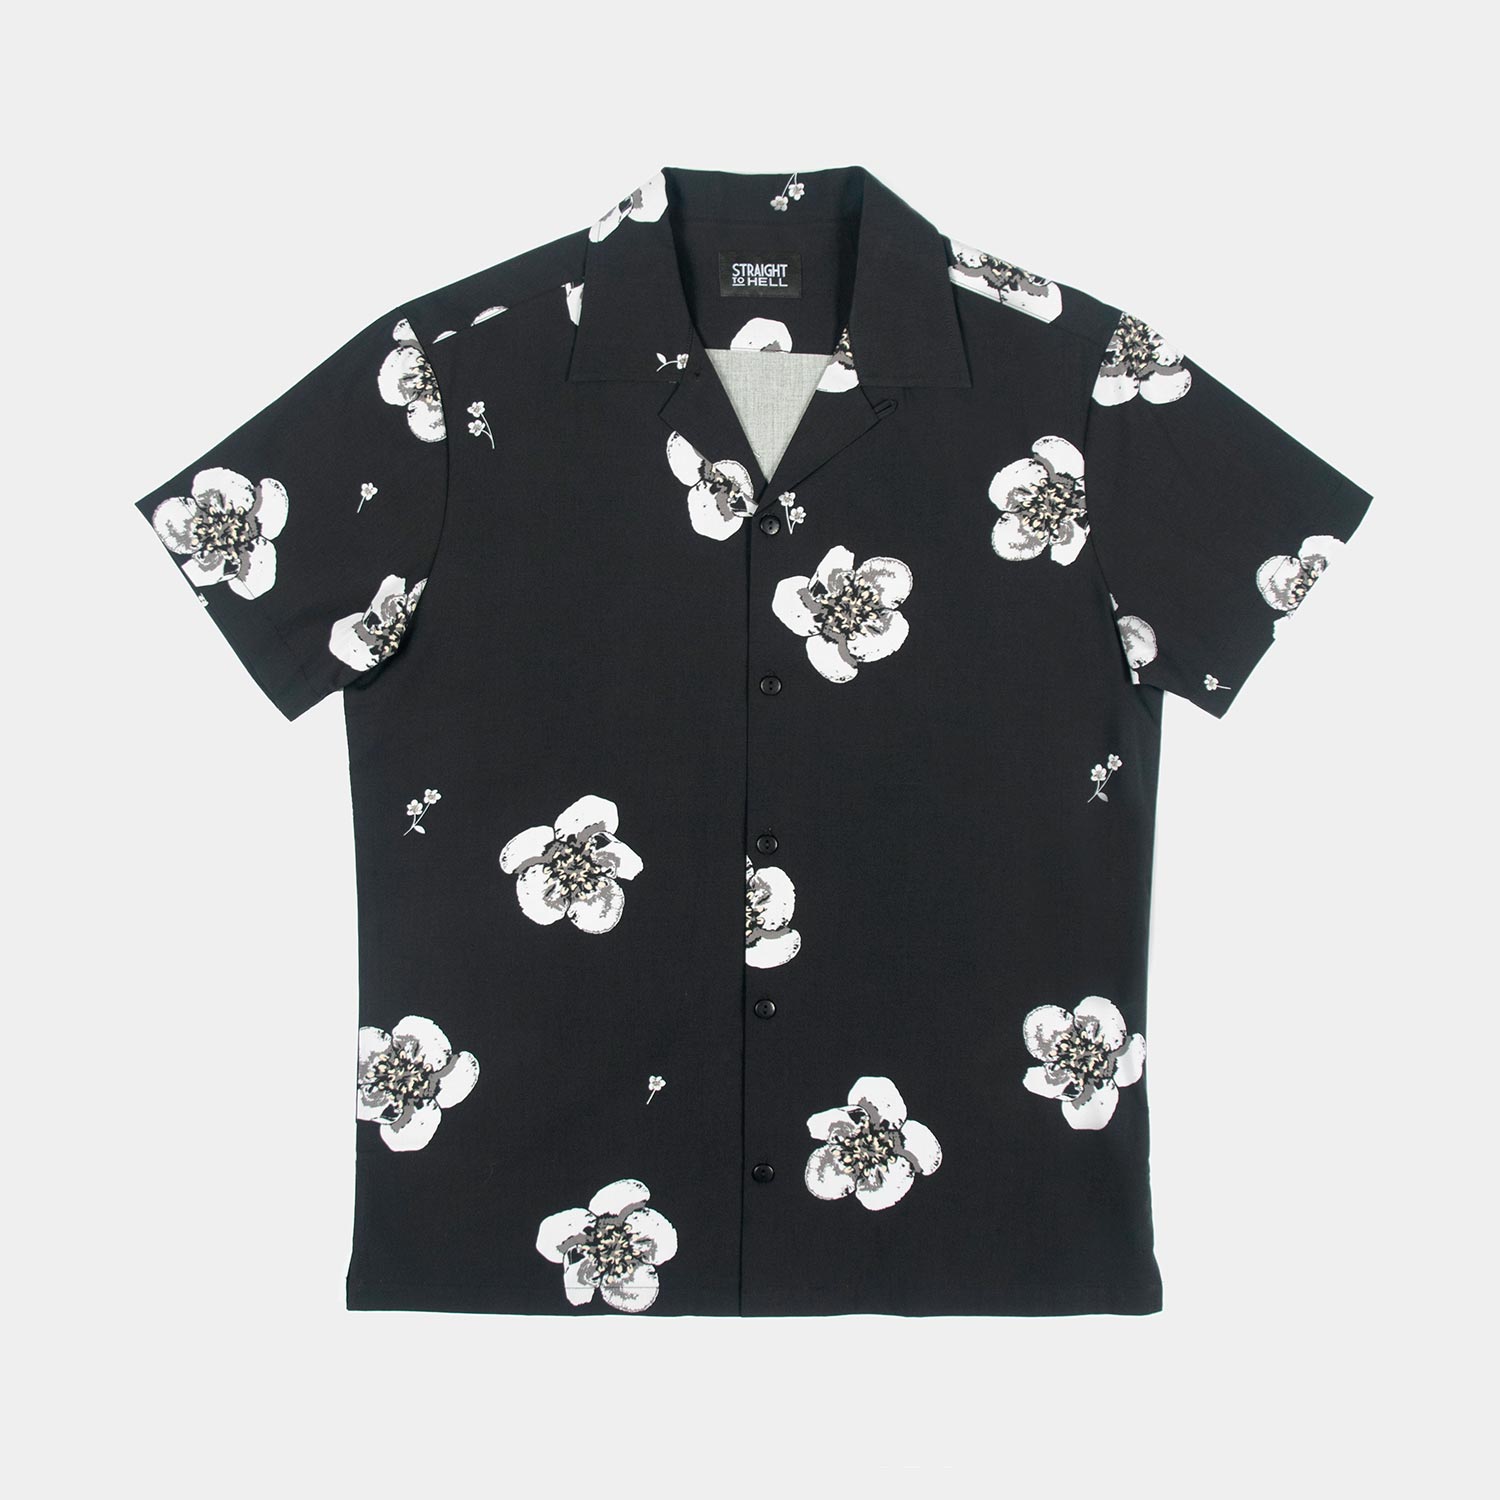 Heart Full of Soul - Black and Grey Floral Print Shirt (Size XS, S